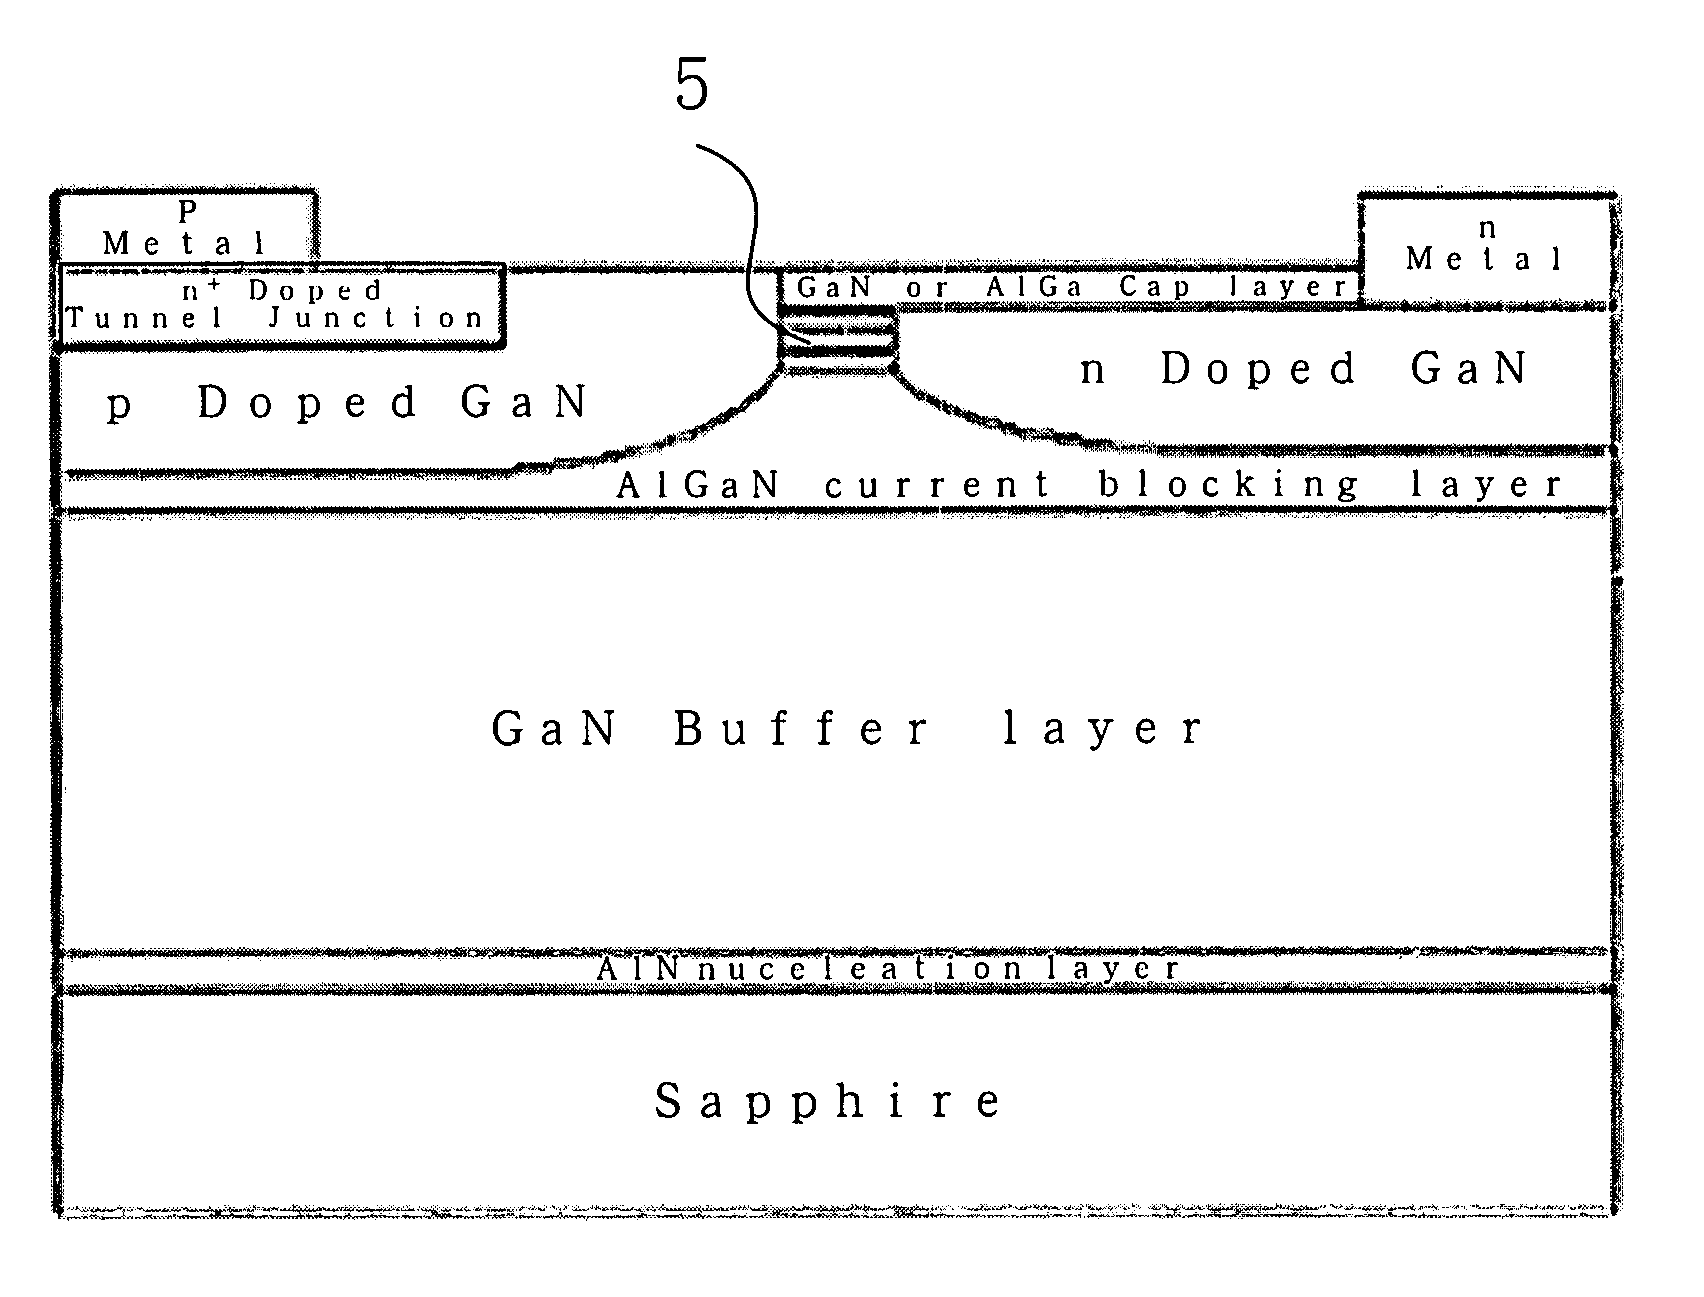 Semiconductor apparatus for white light generation and amplification